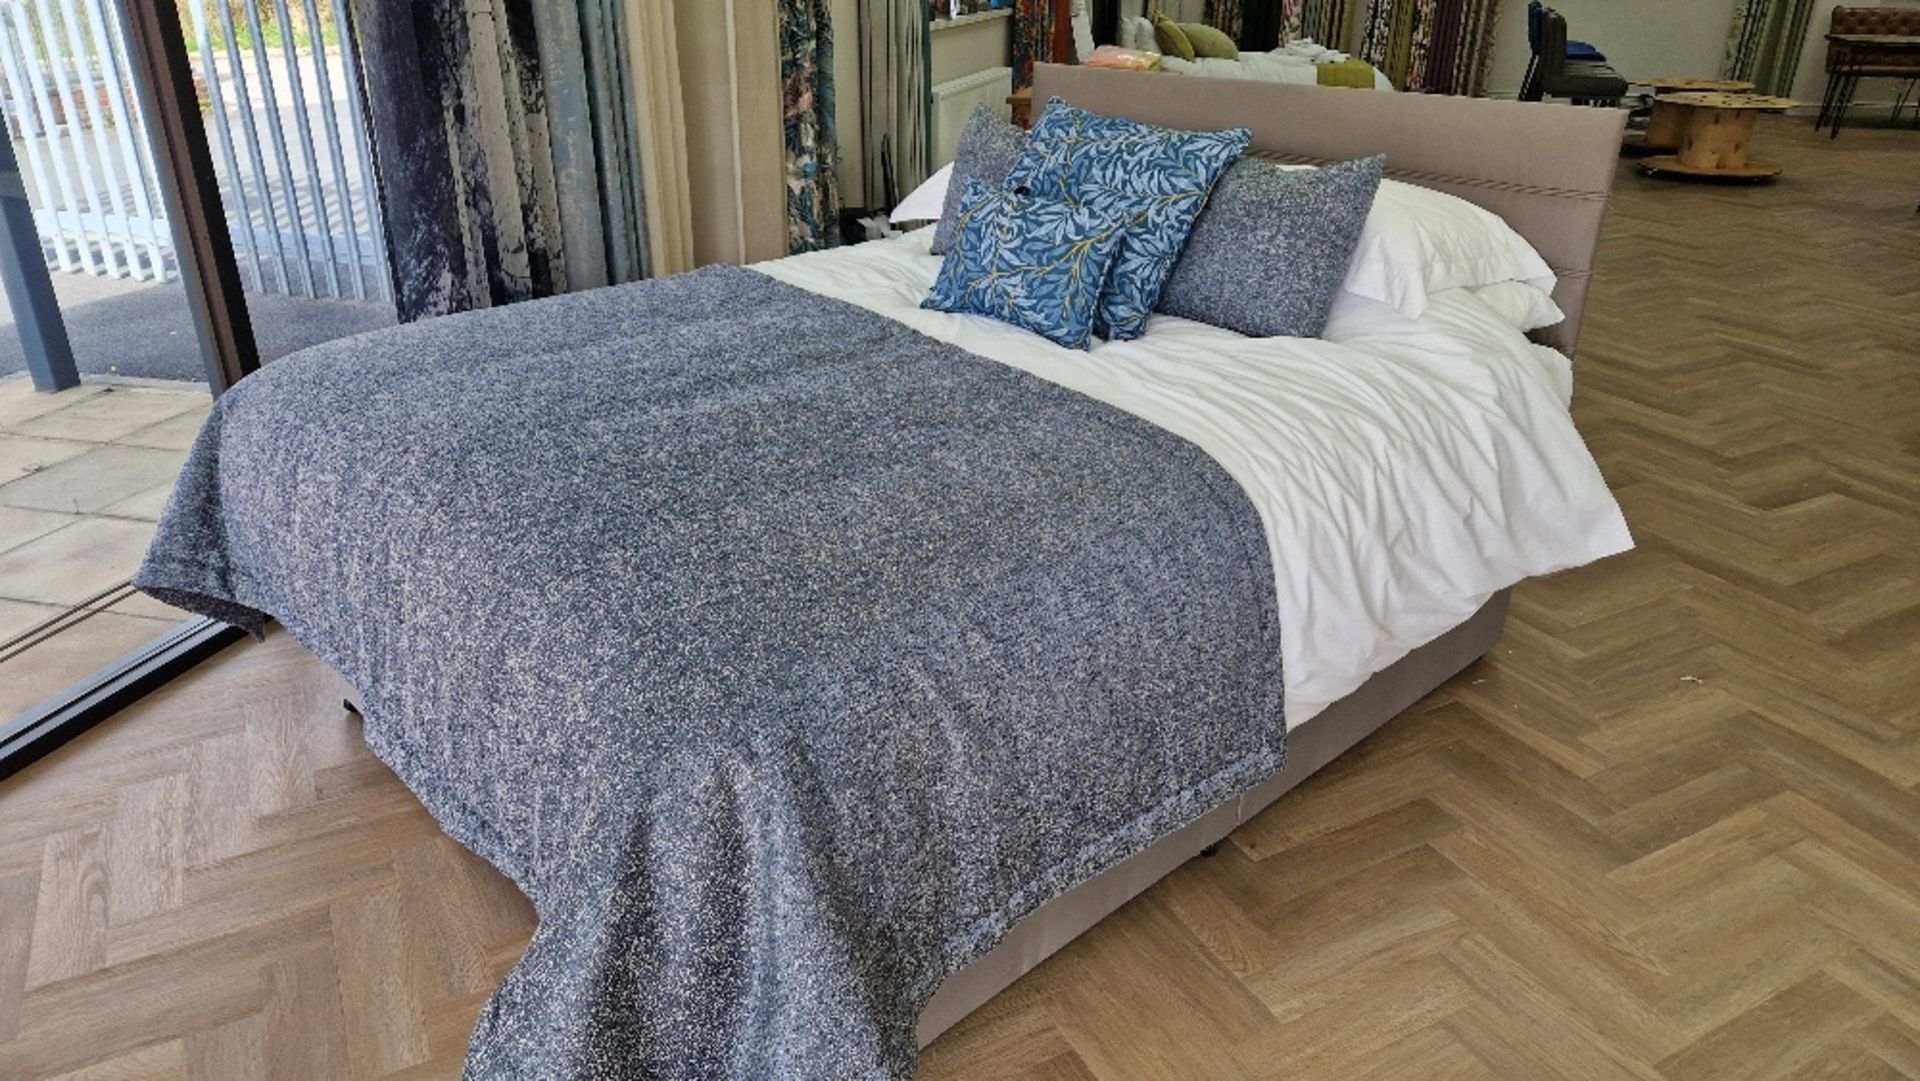 DOUBLE DEVAN BED WITH MATTRESS, HEADBOARD, DUVET & PILLOWS, ALL LINEN, CUSHIONS AND BED THROW ***